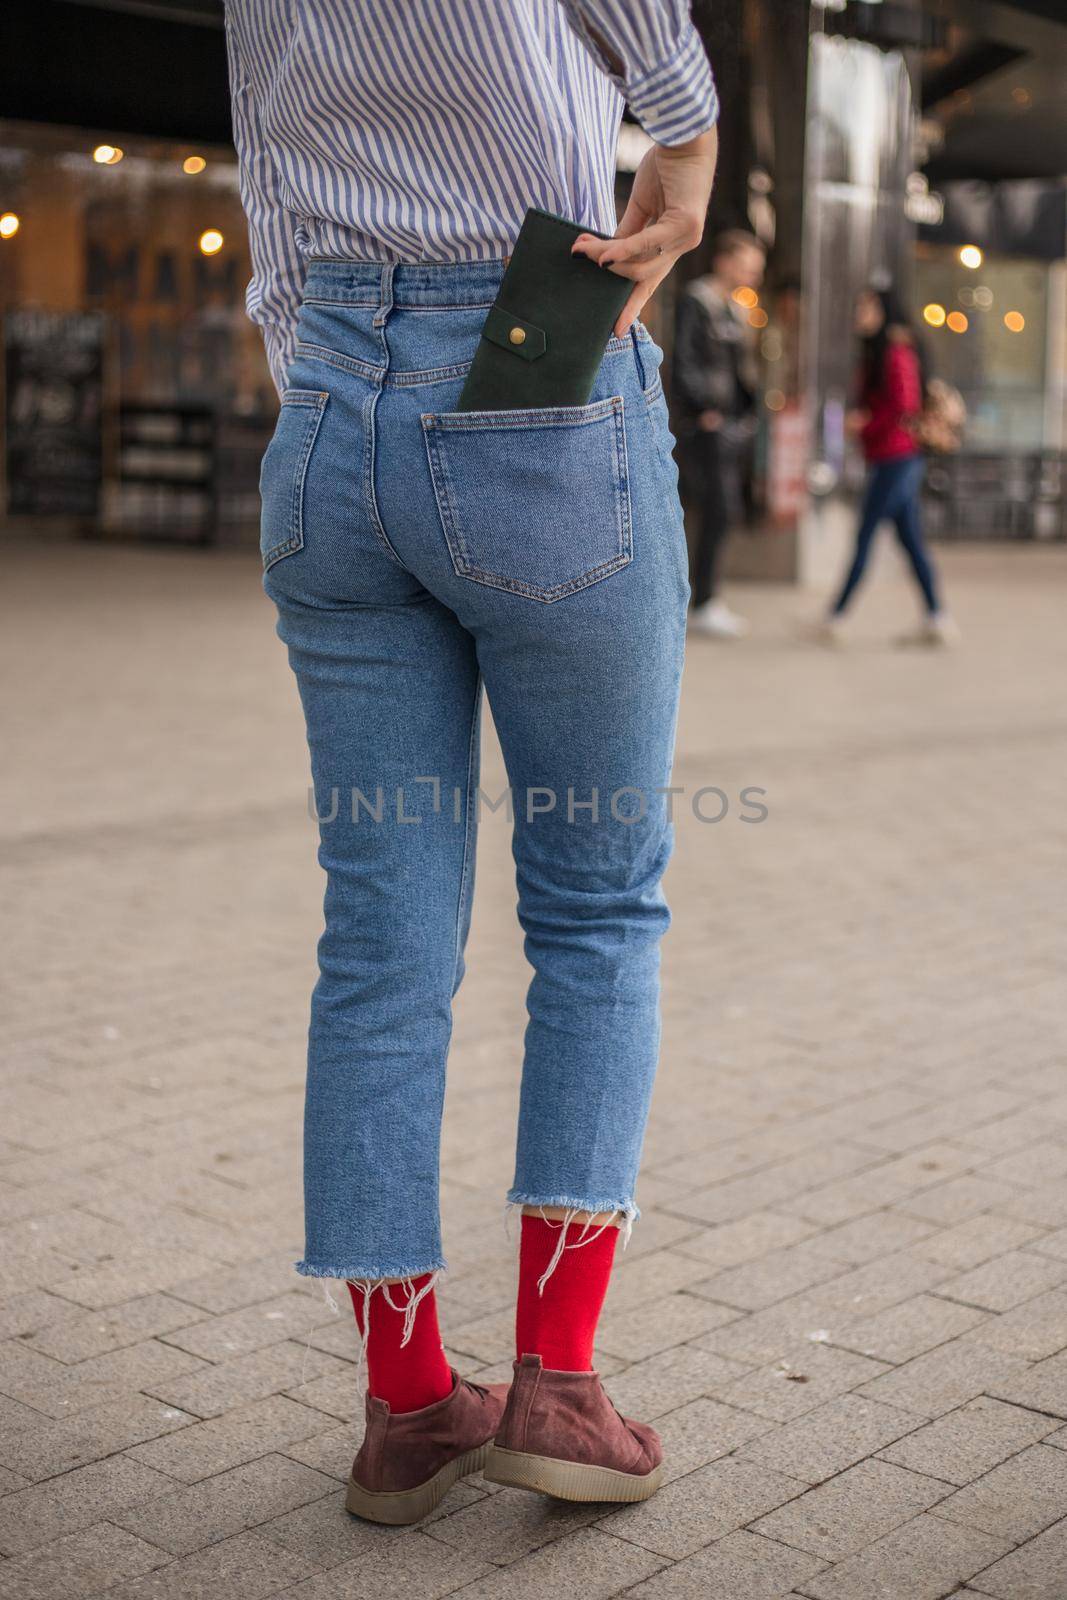 Confident woman posing in save keeping your wallet in the back pocket by Symonenko